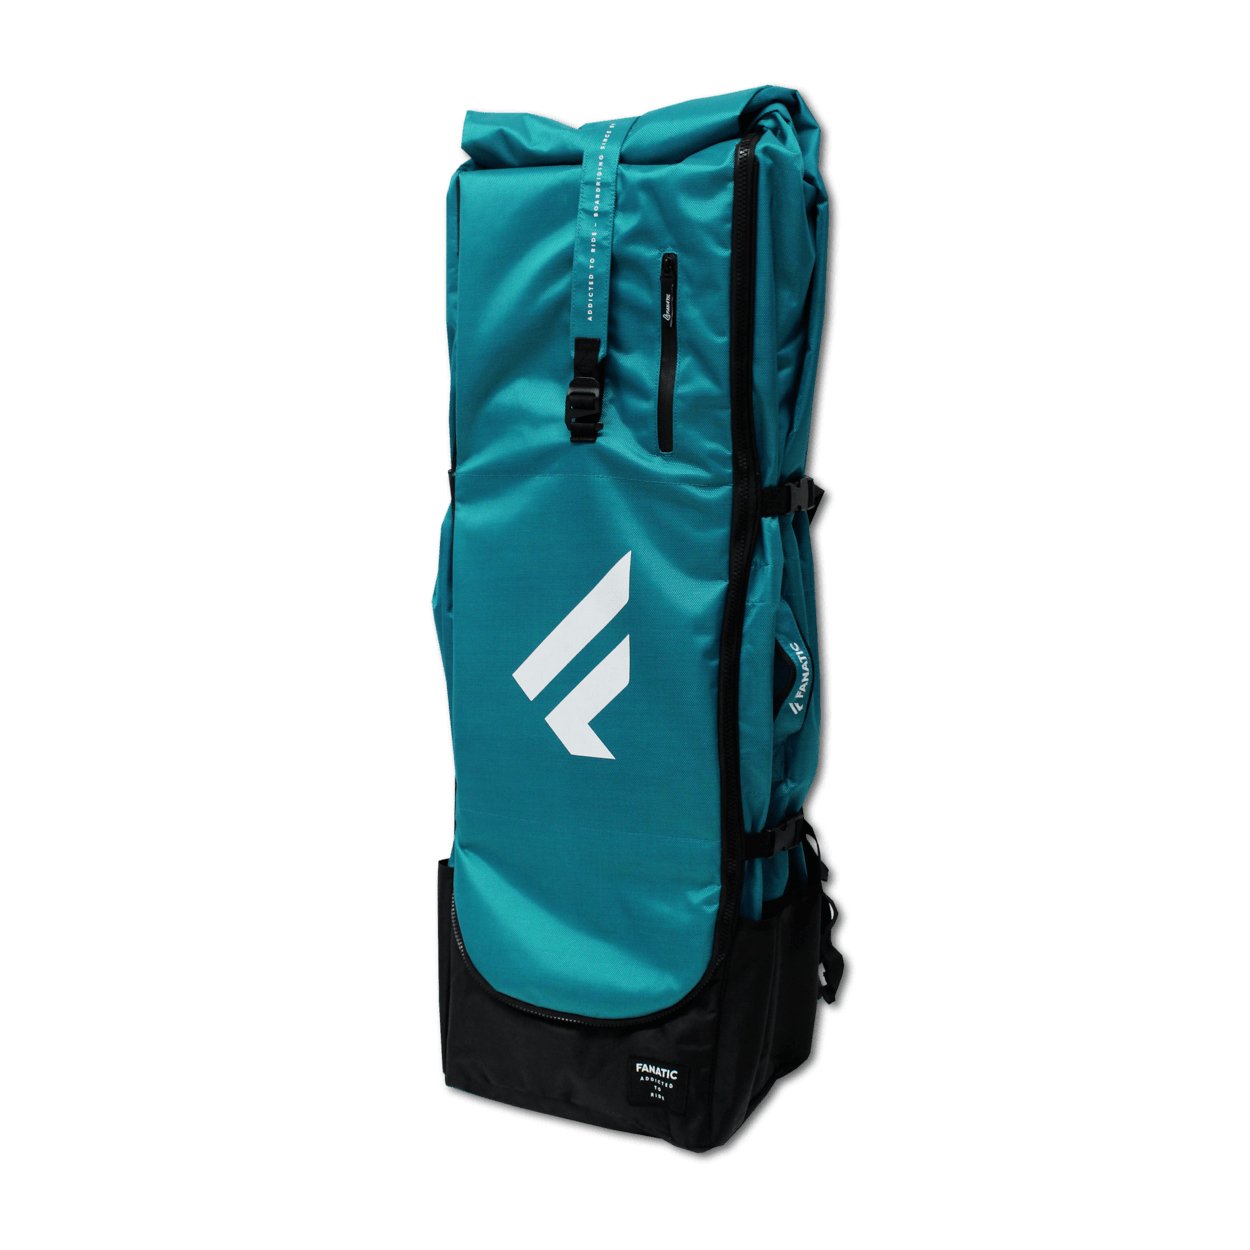 Fanatic Gearbag Pocket iSUP 2024 - Worthing Watersports - 9008415928040 - Spareparts - Fanatic SUP